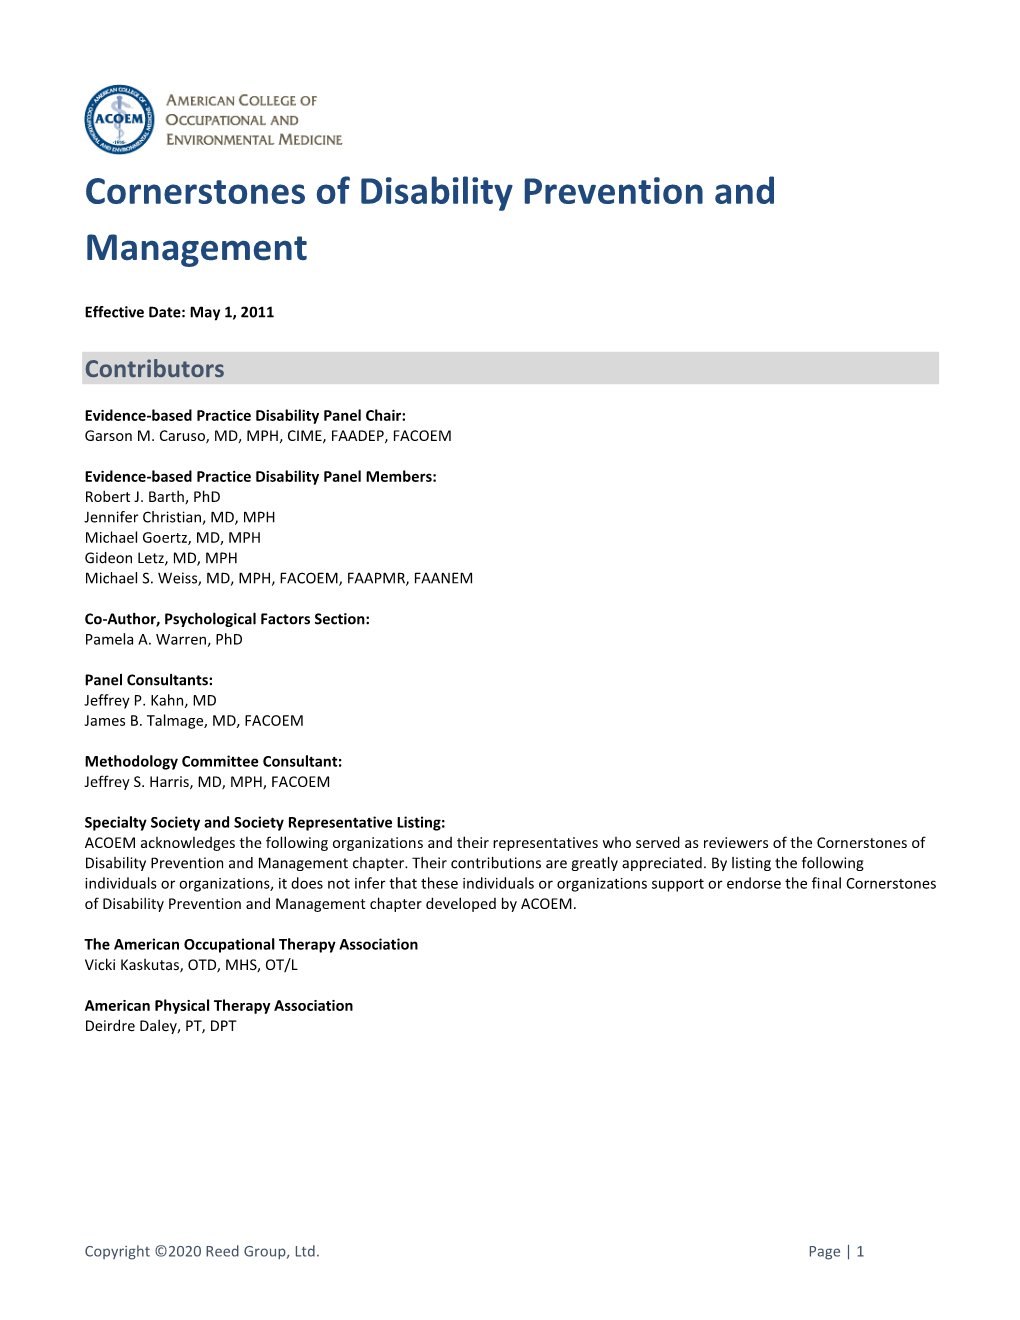 Cornerstones of Disability Prevention and Management